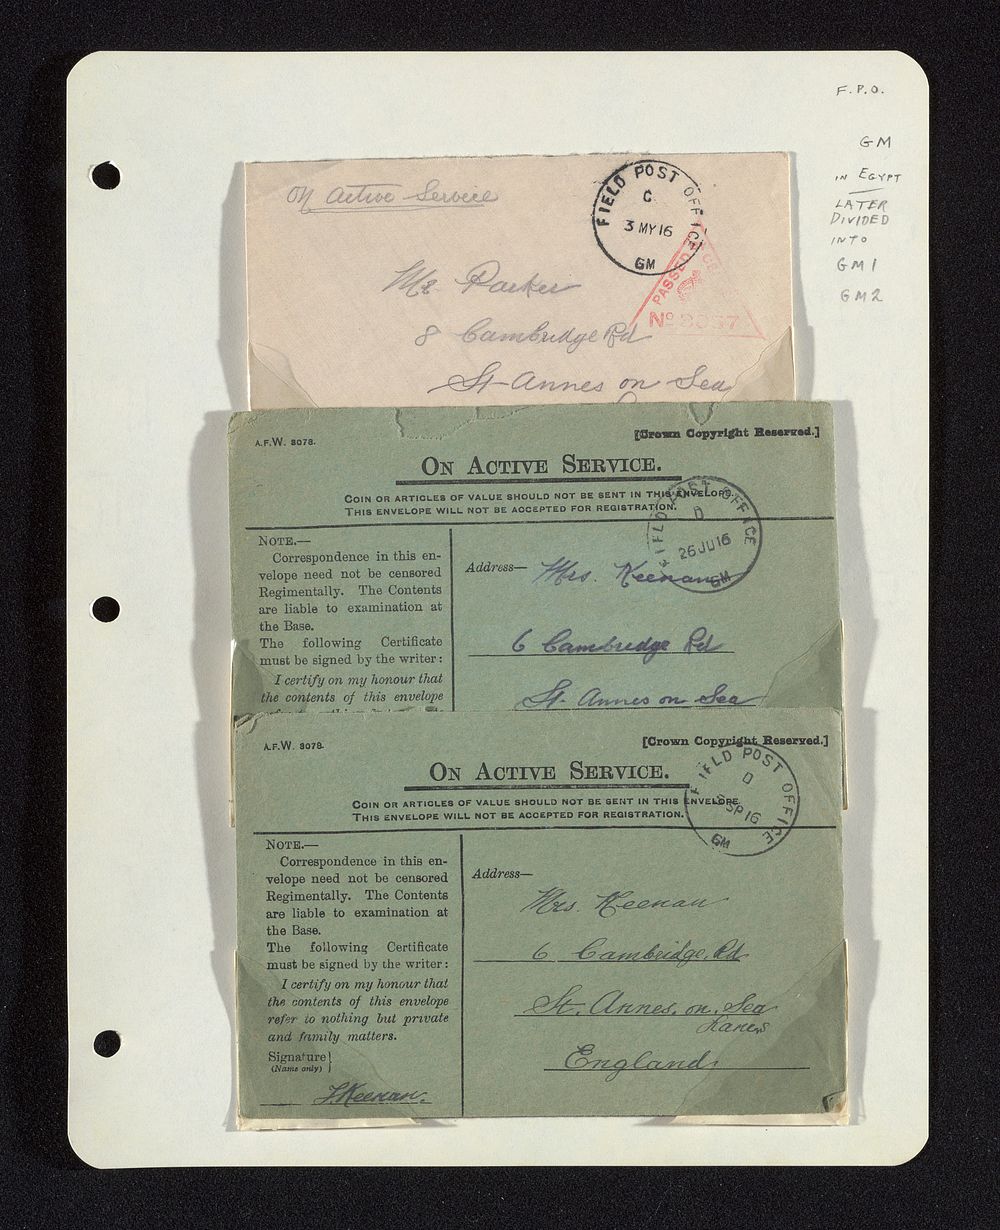 album page with three covers with British Field Post markings on album page